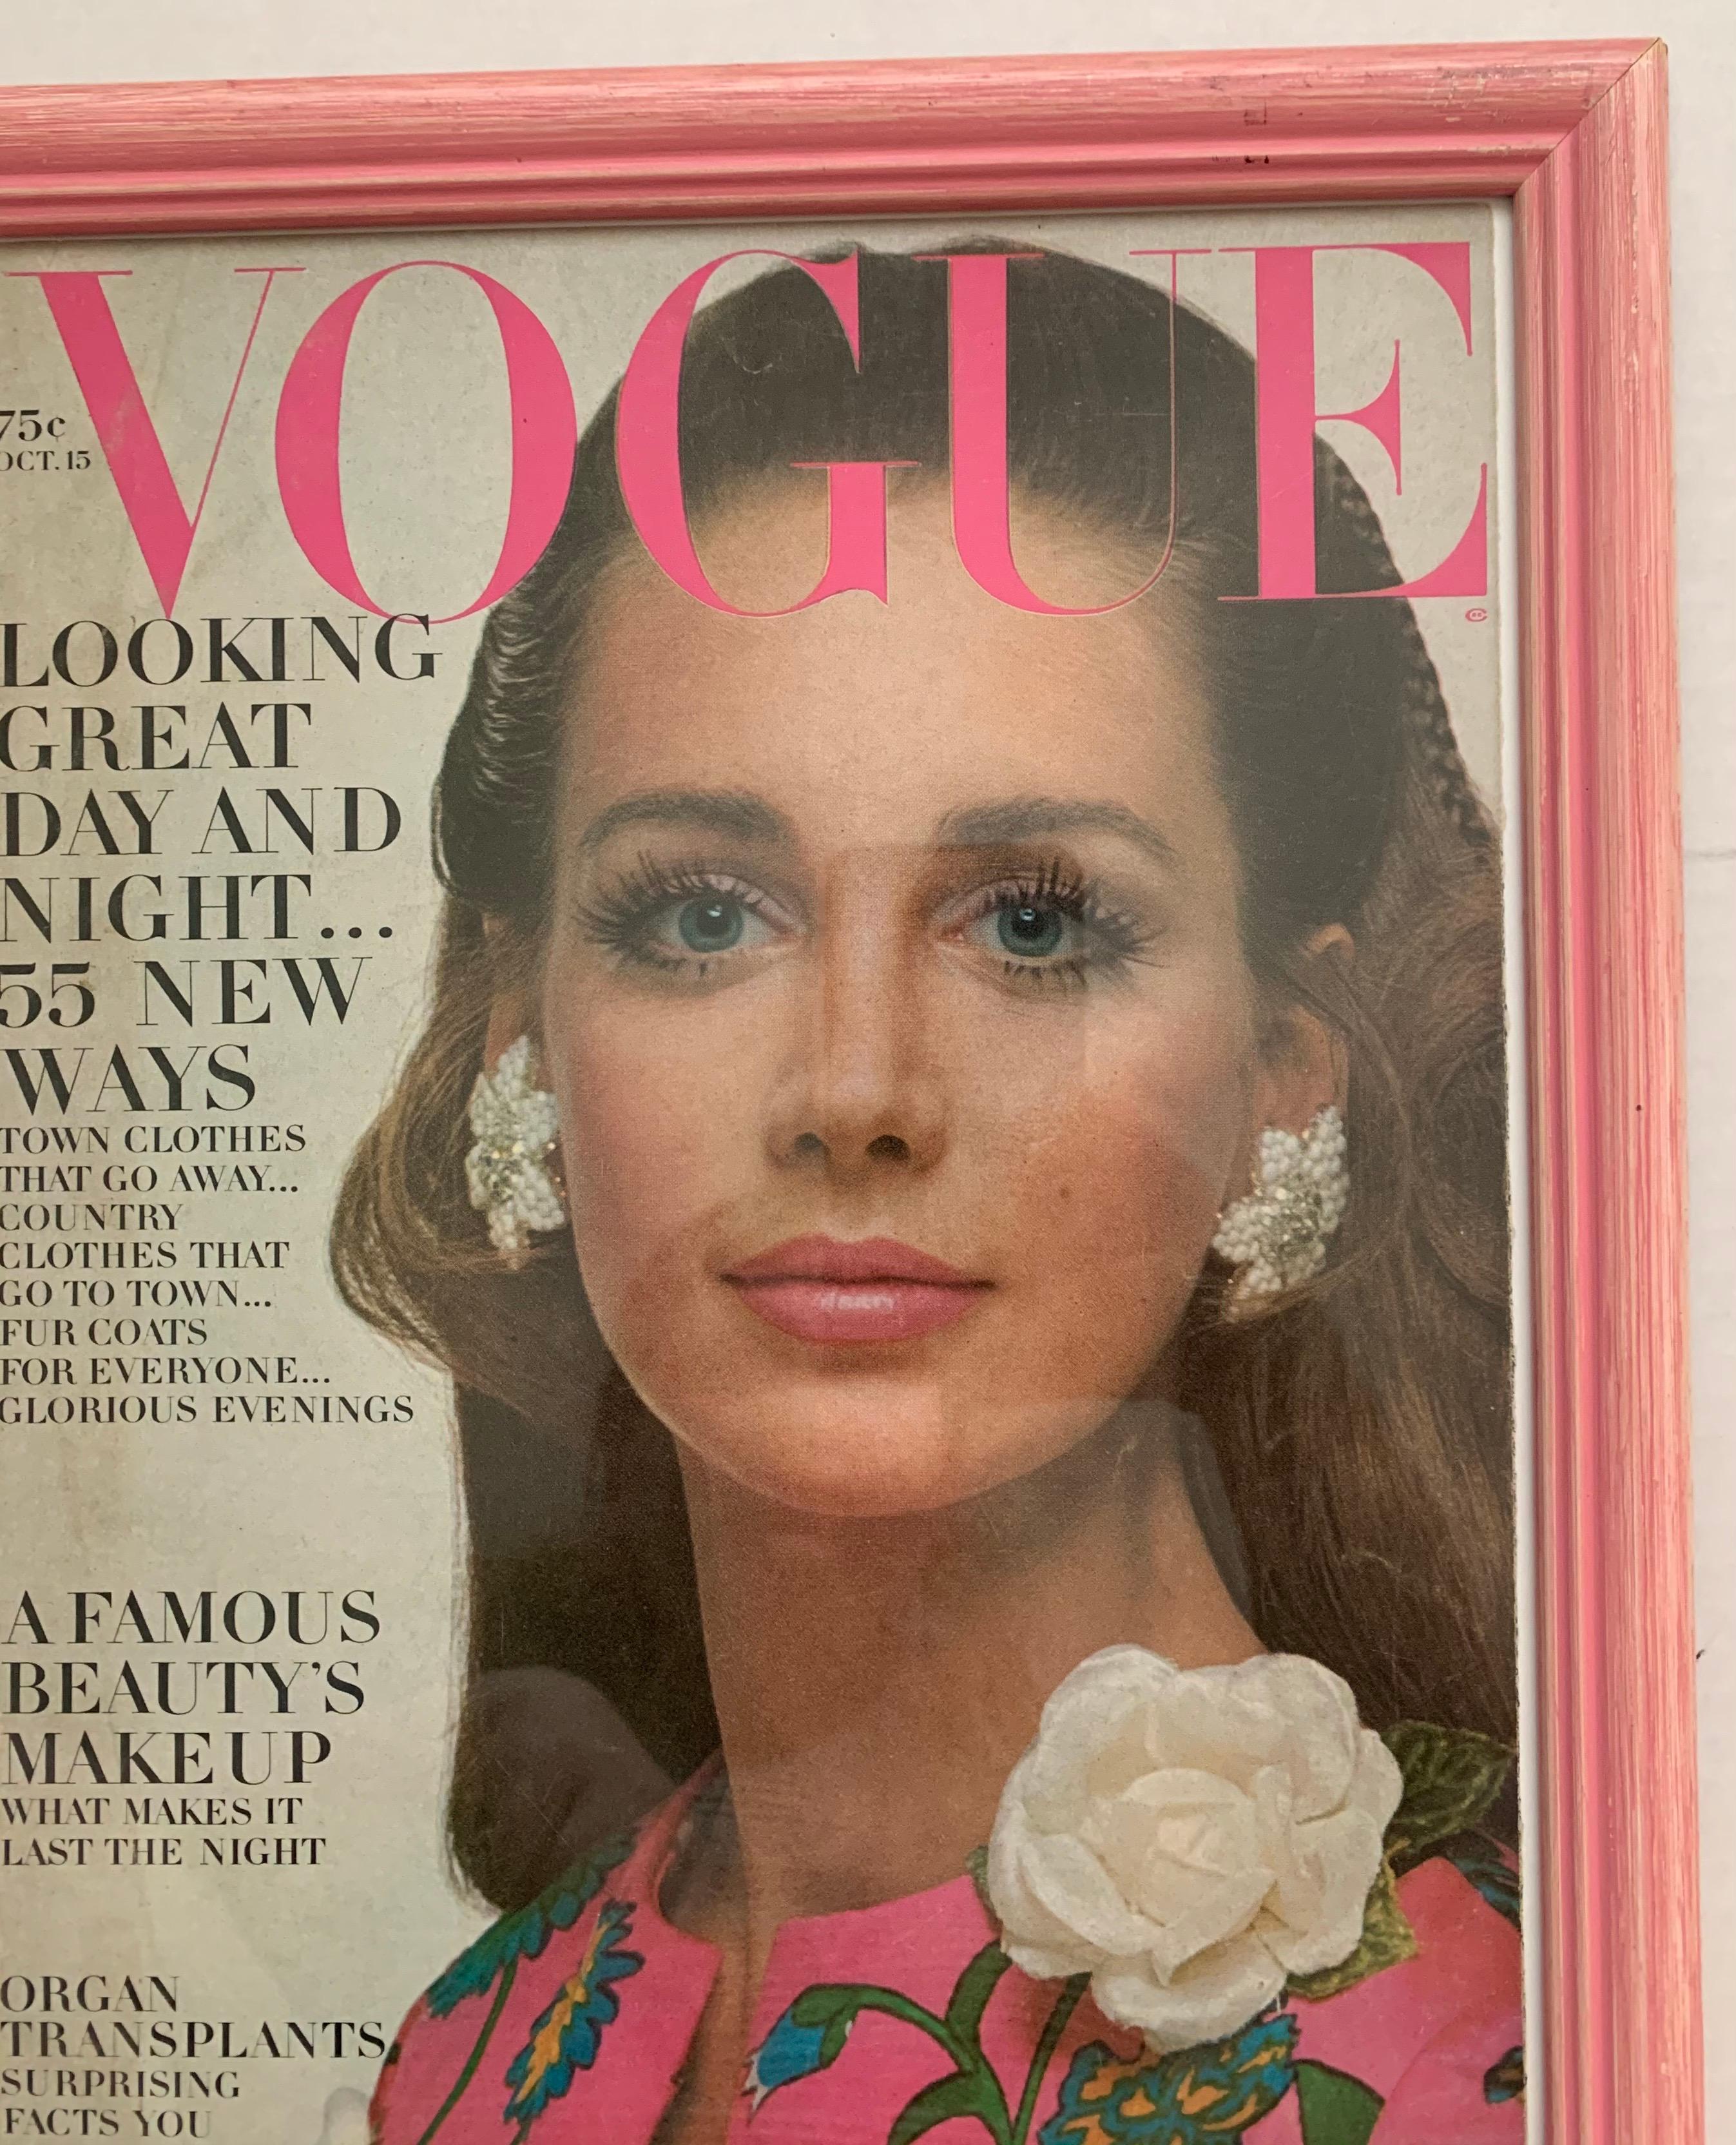 October 15, 1968 Vogue magazine framed original cover. Model Windsor Elliott photographed by Gianni Penati. 
As found framed condition in pink painted wooden frame.